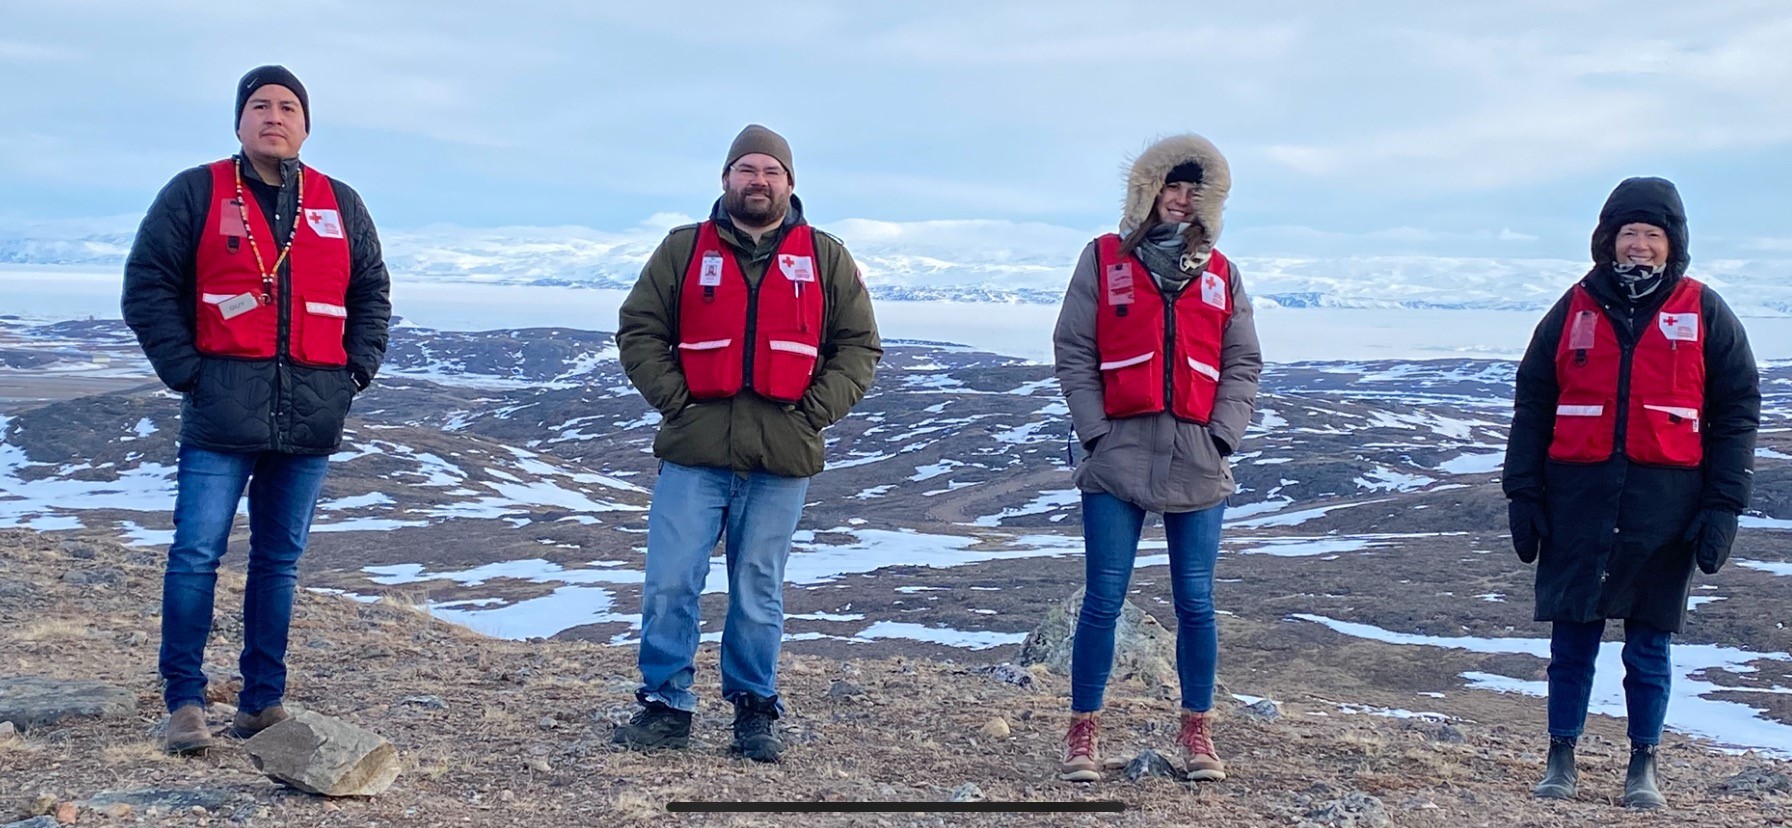 Red Cross team in red vests and winter coats standing on a snowy landscape in Iqaluit.